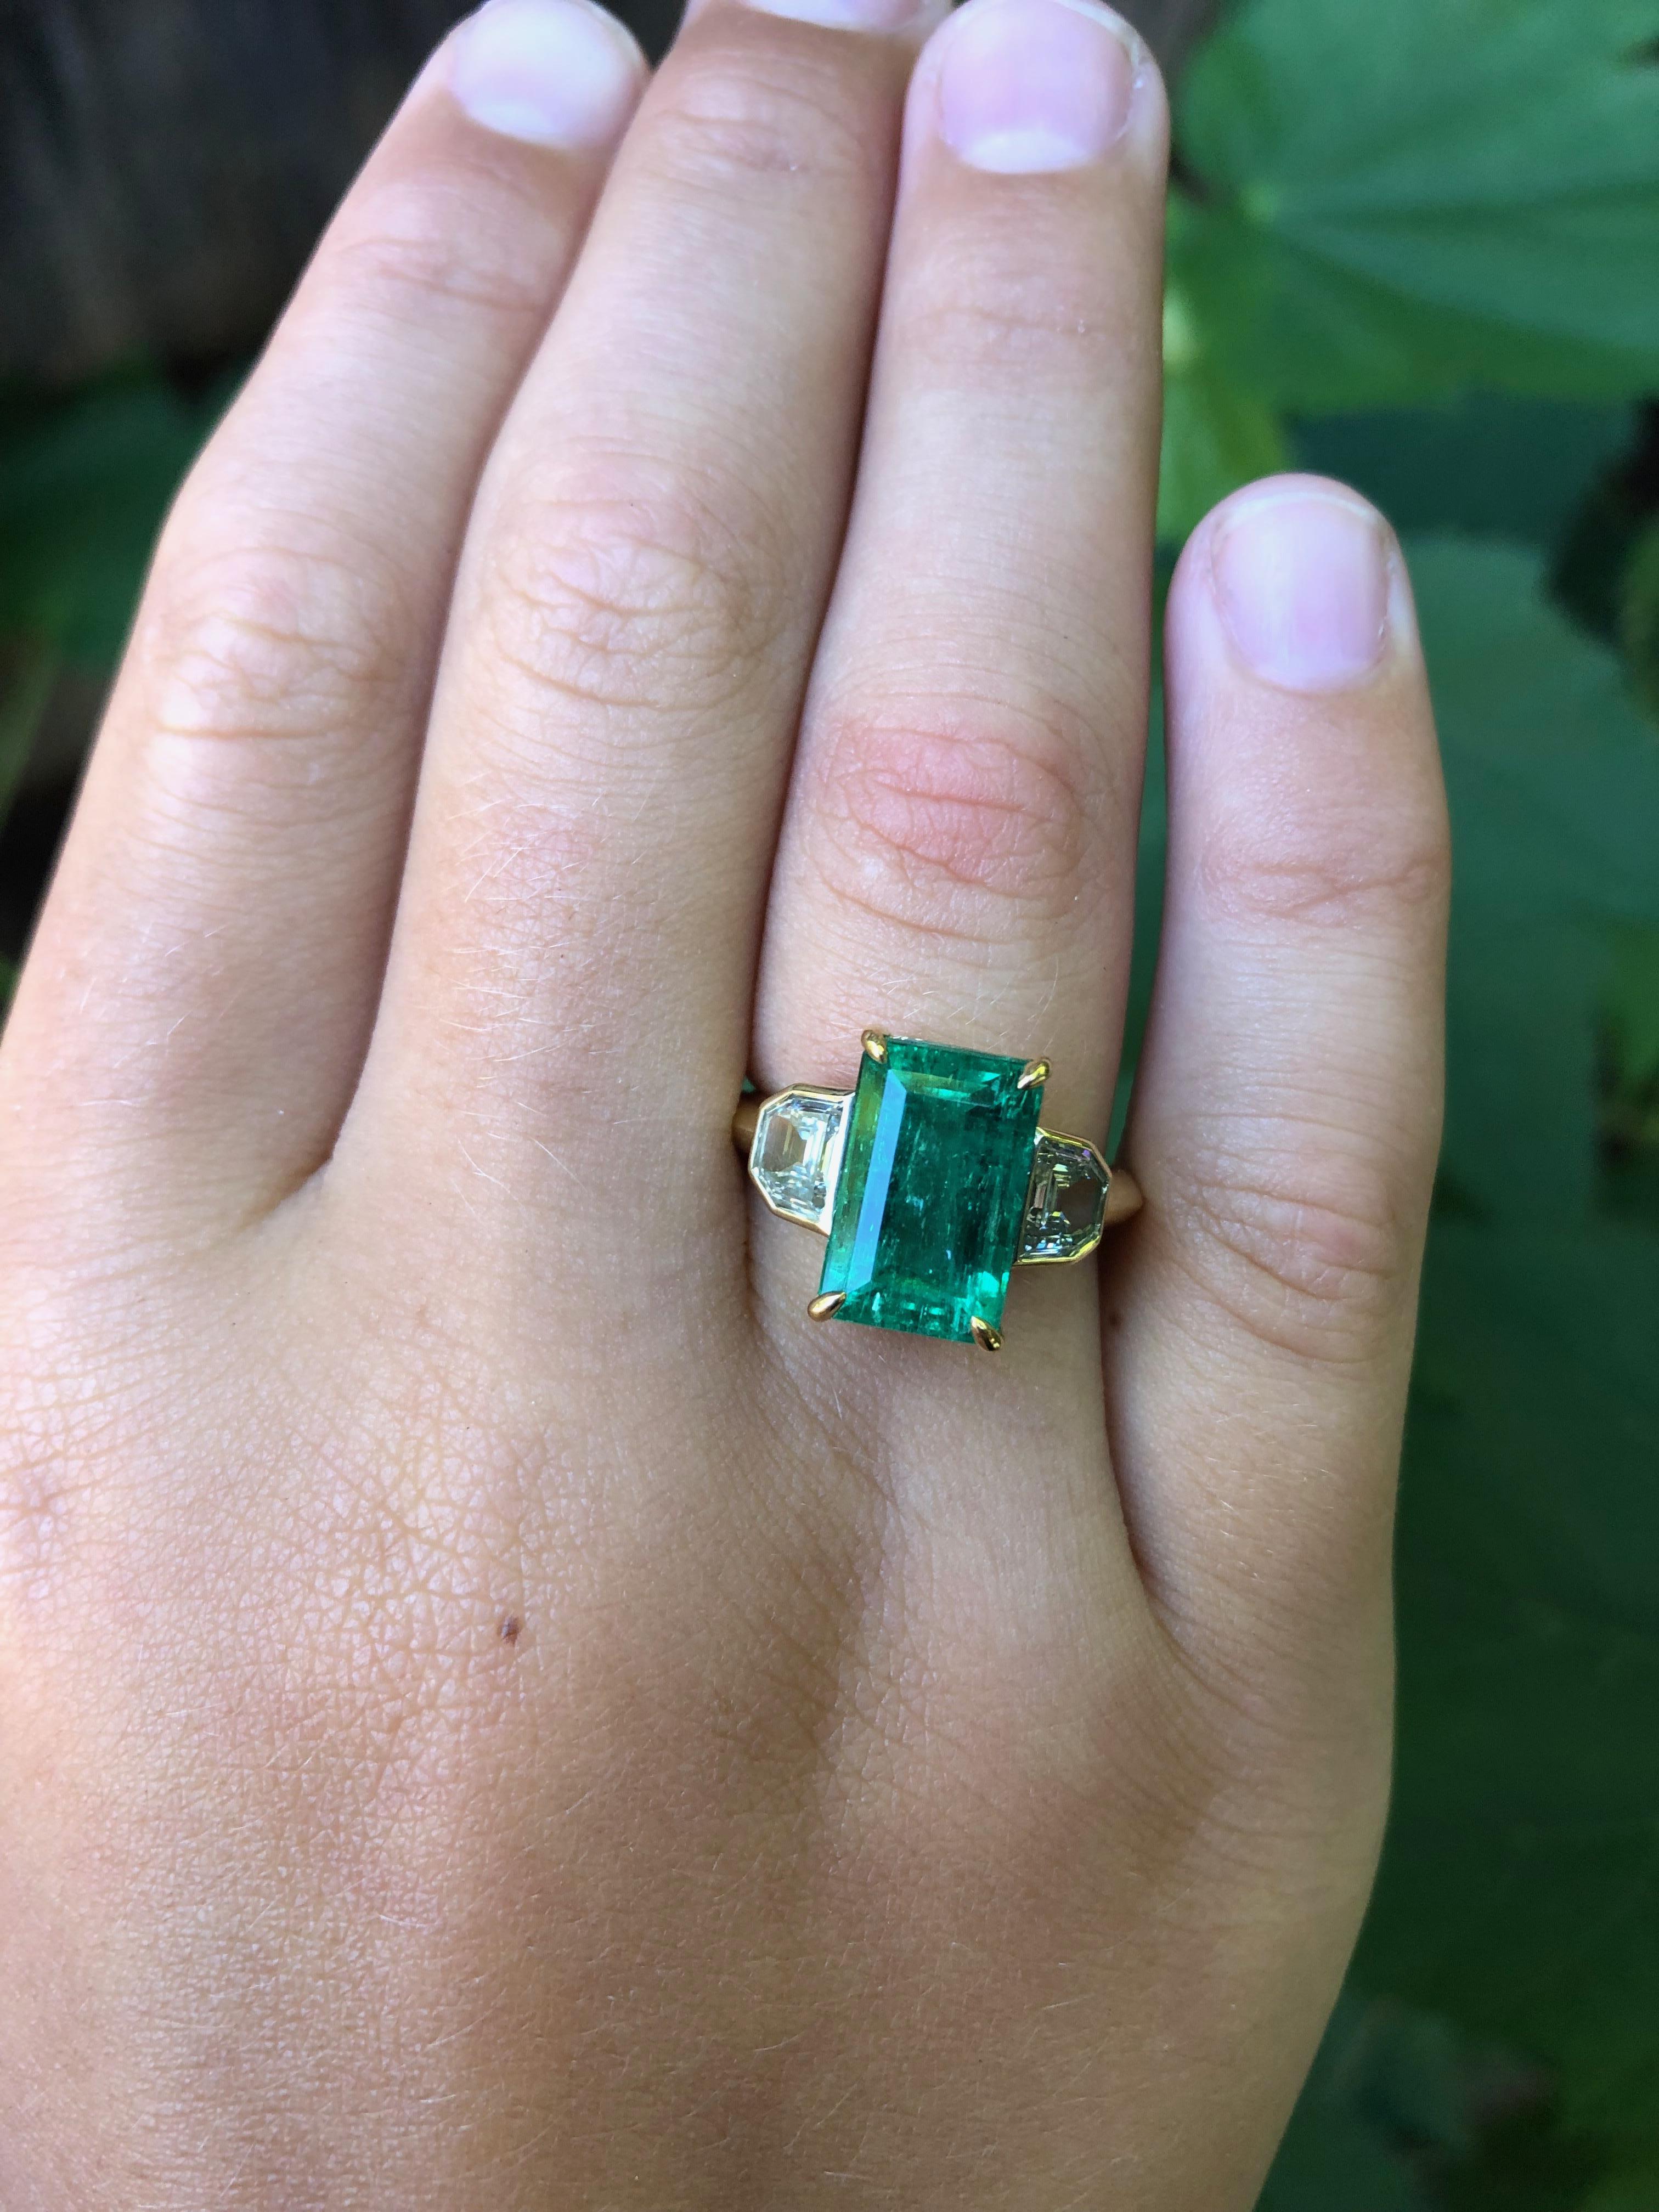 4.35 carat emerald cut Colombian Muzo Emerald is set in a hand fabricated 18 karat gold setting with 0.94 carat total weight true antique VS-KL diamonds. This emerald is vibrant with an alpine green color, and certified 